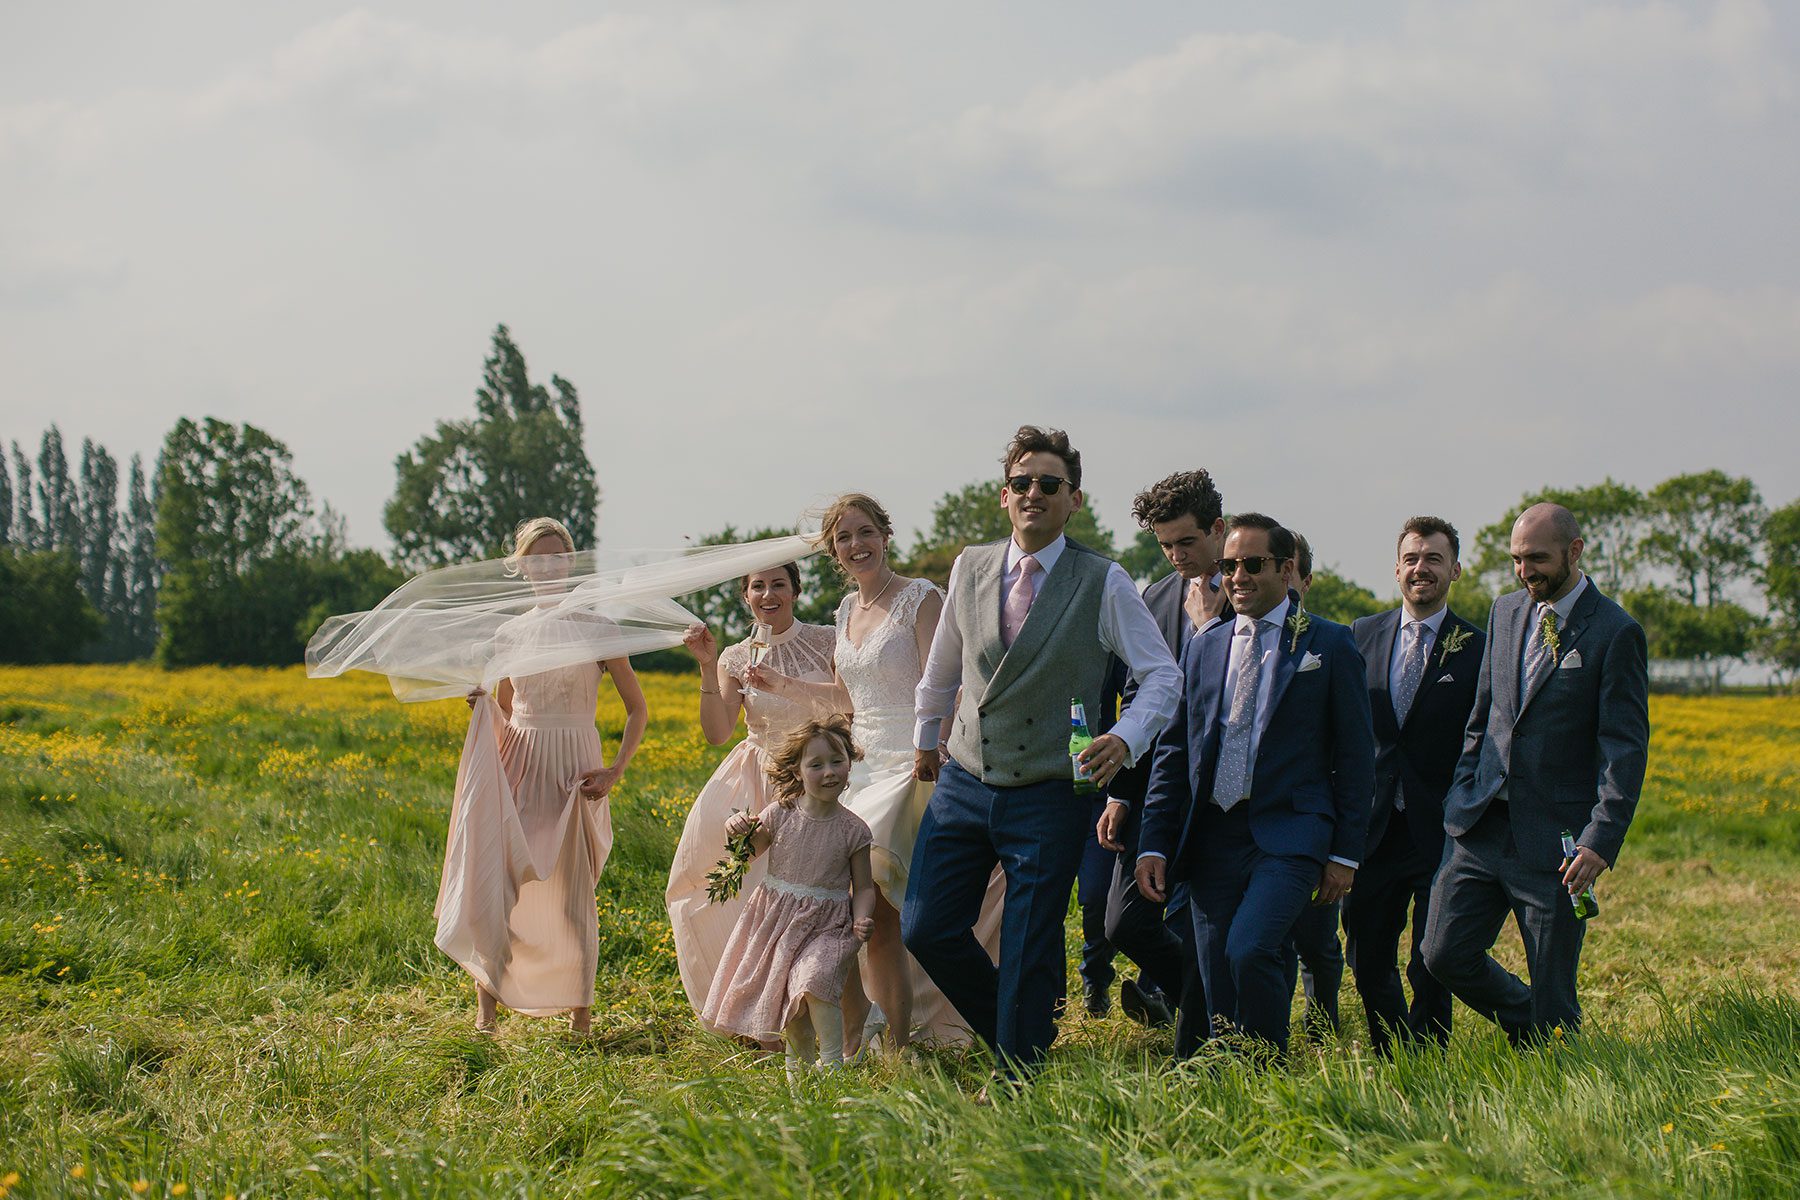 Reportage Wedding Photography in Cheltenham, Gloucestershire & the Cotswolds | Bullit Photography.